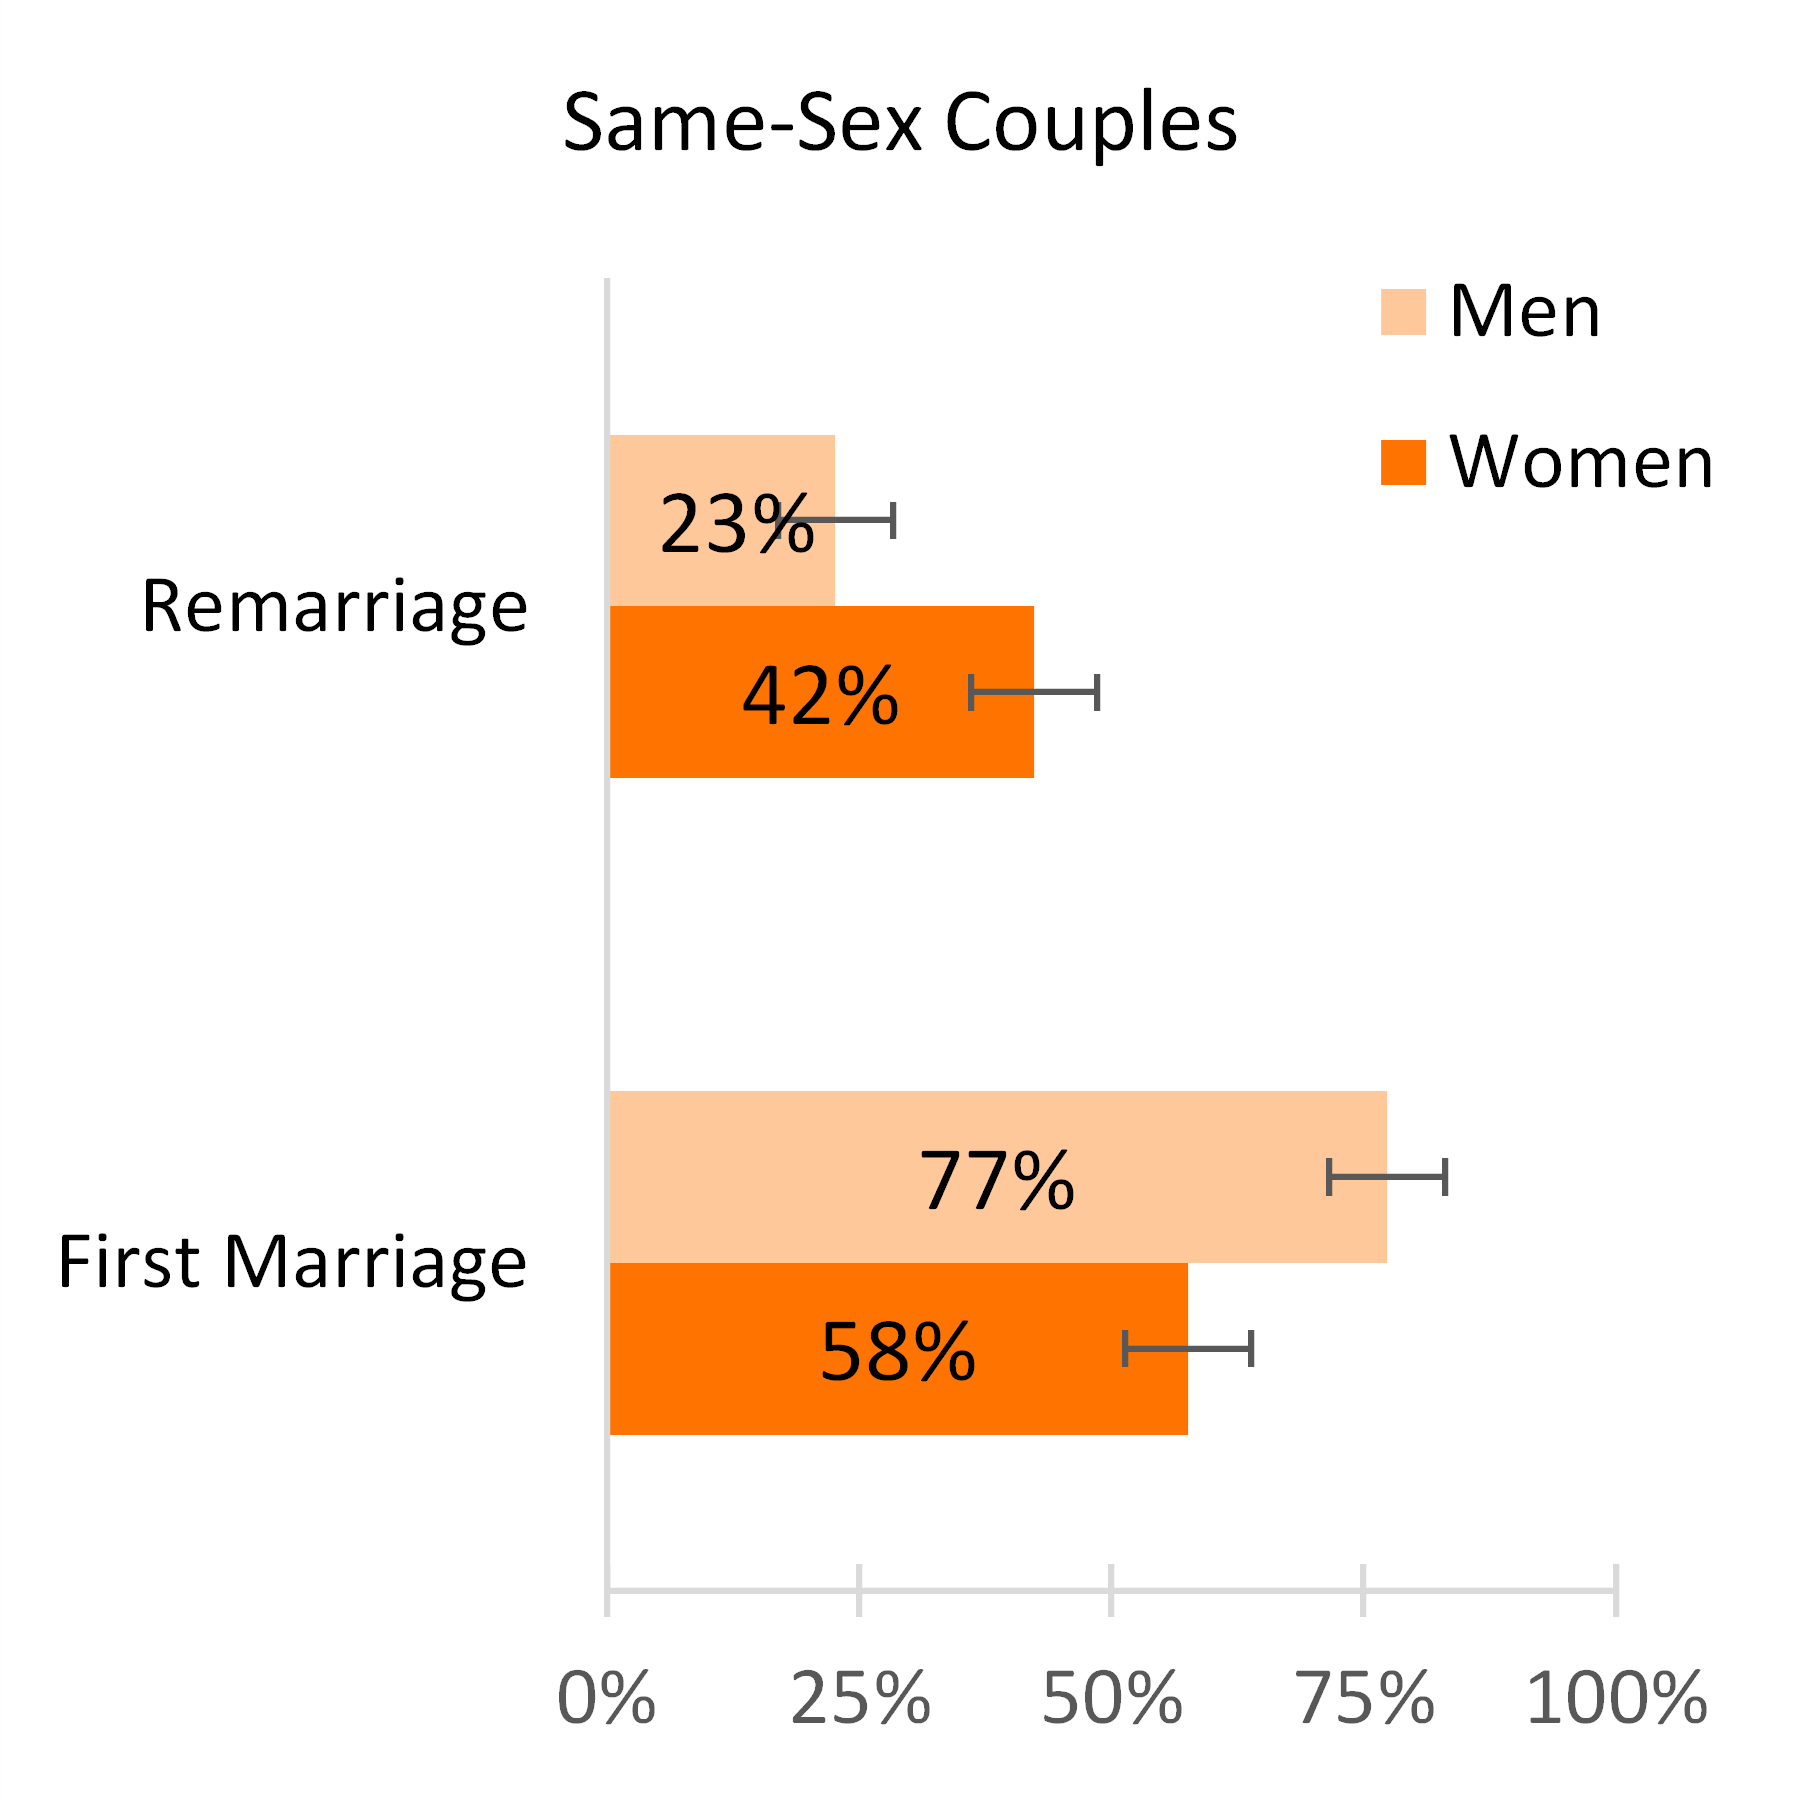 Graph showing Figure 2. First Marriage and Remarriage for Same-Sex Couples, 2019